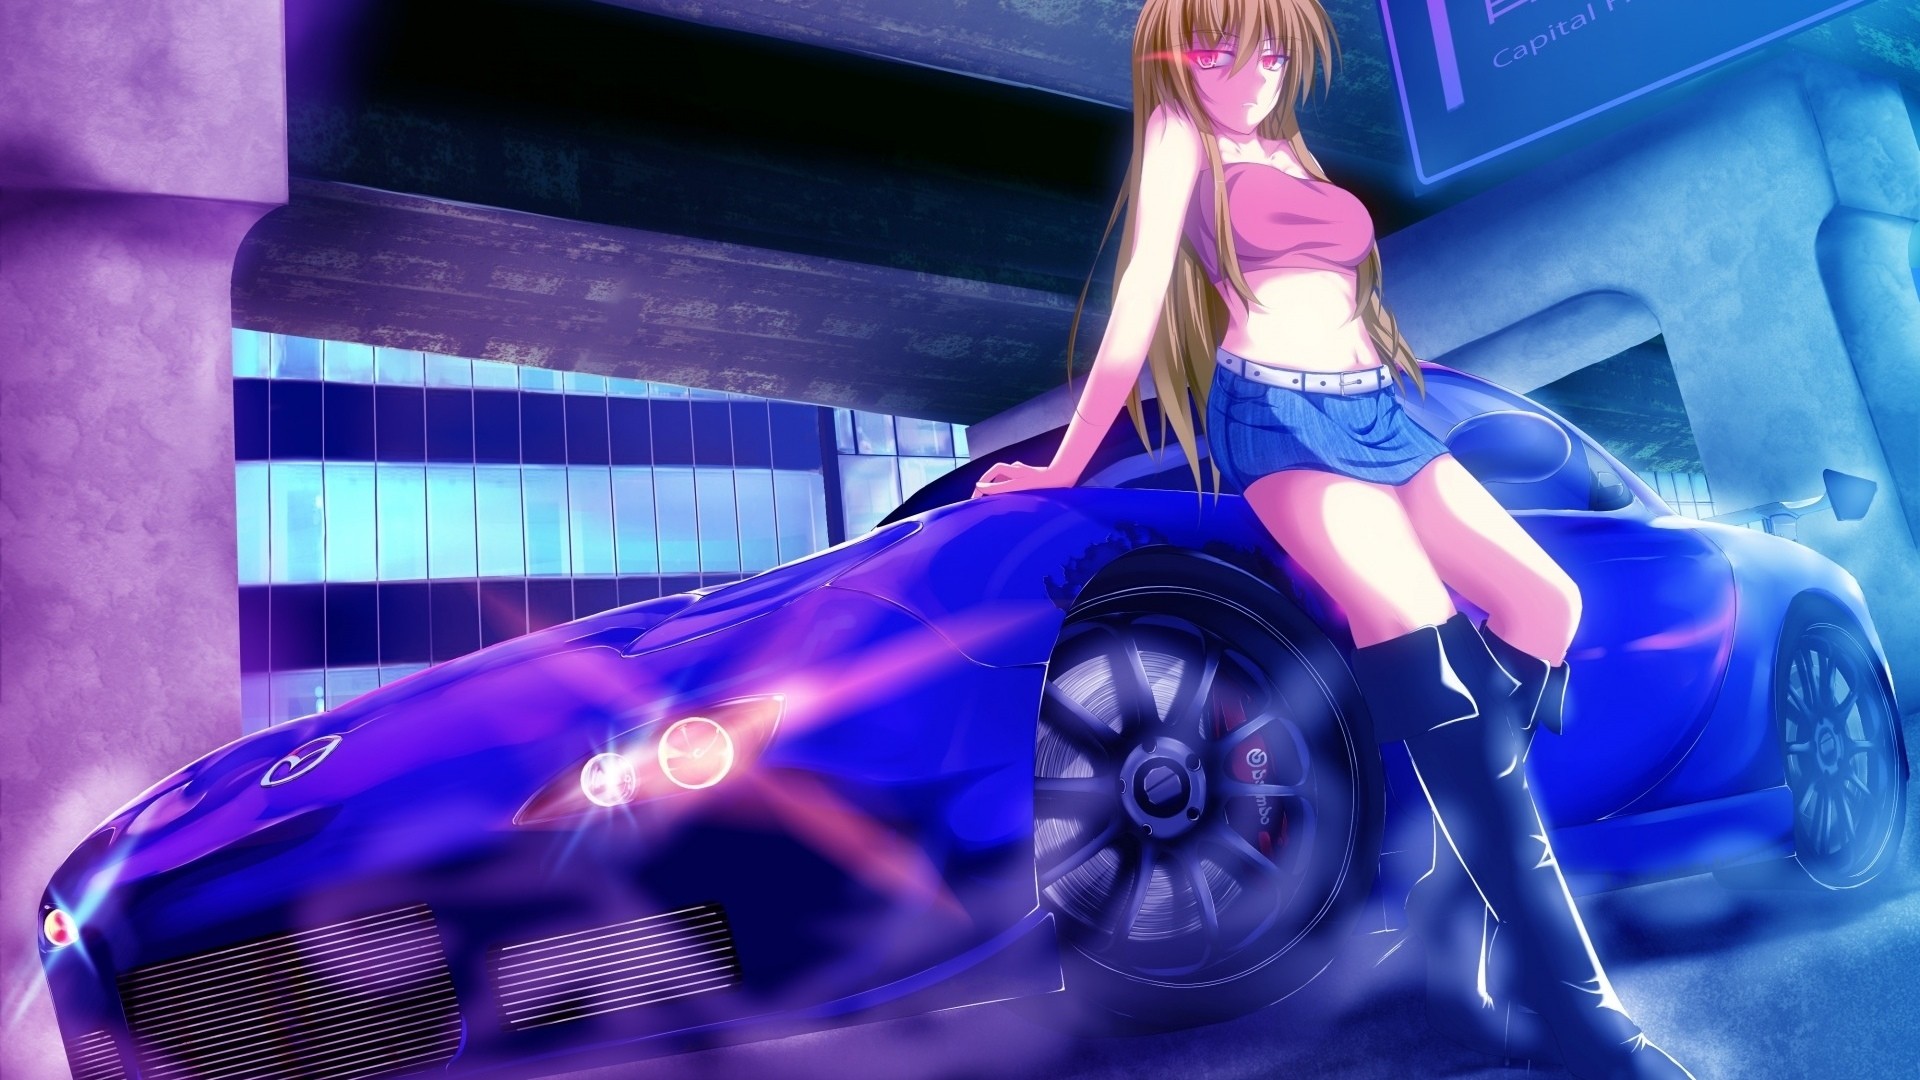 Anime Girl With Car Wallpaper 1920x1080